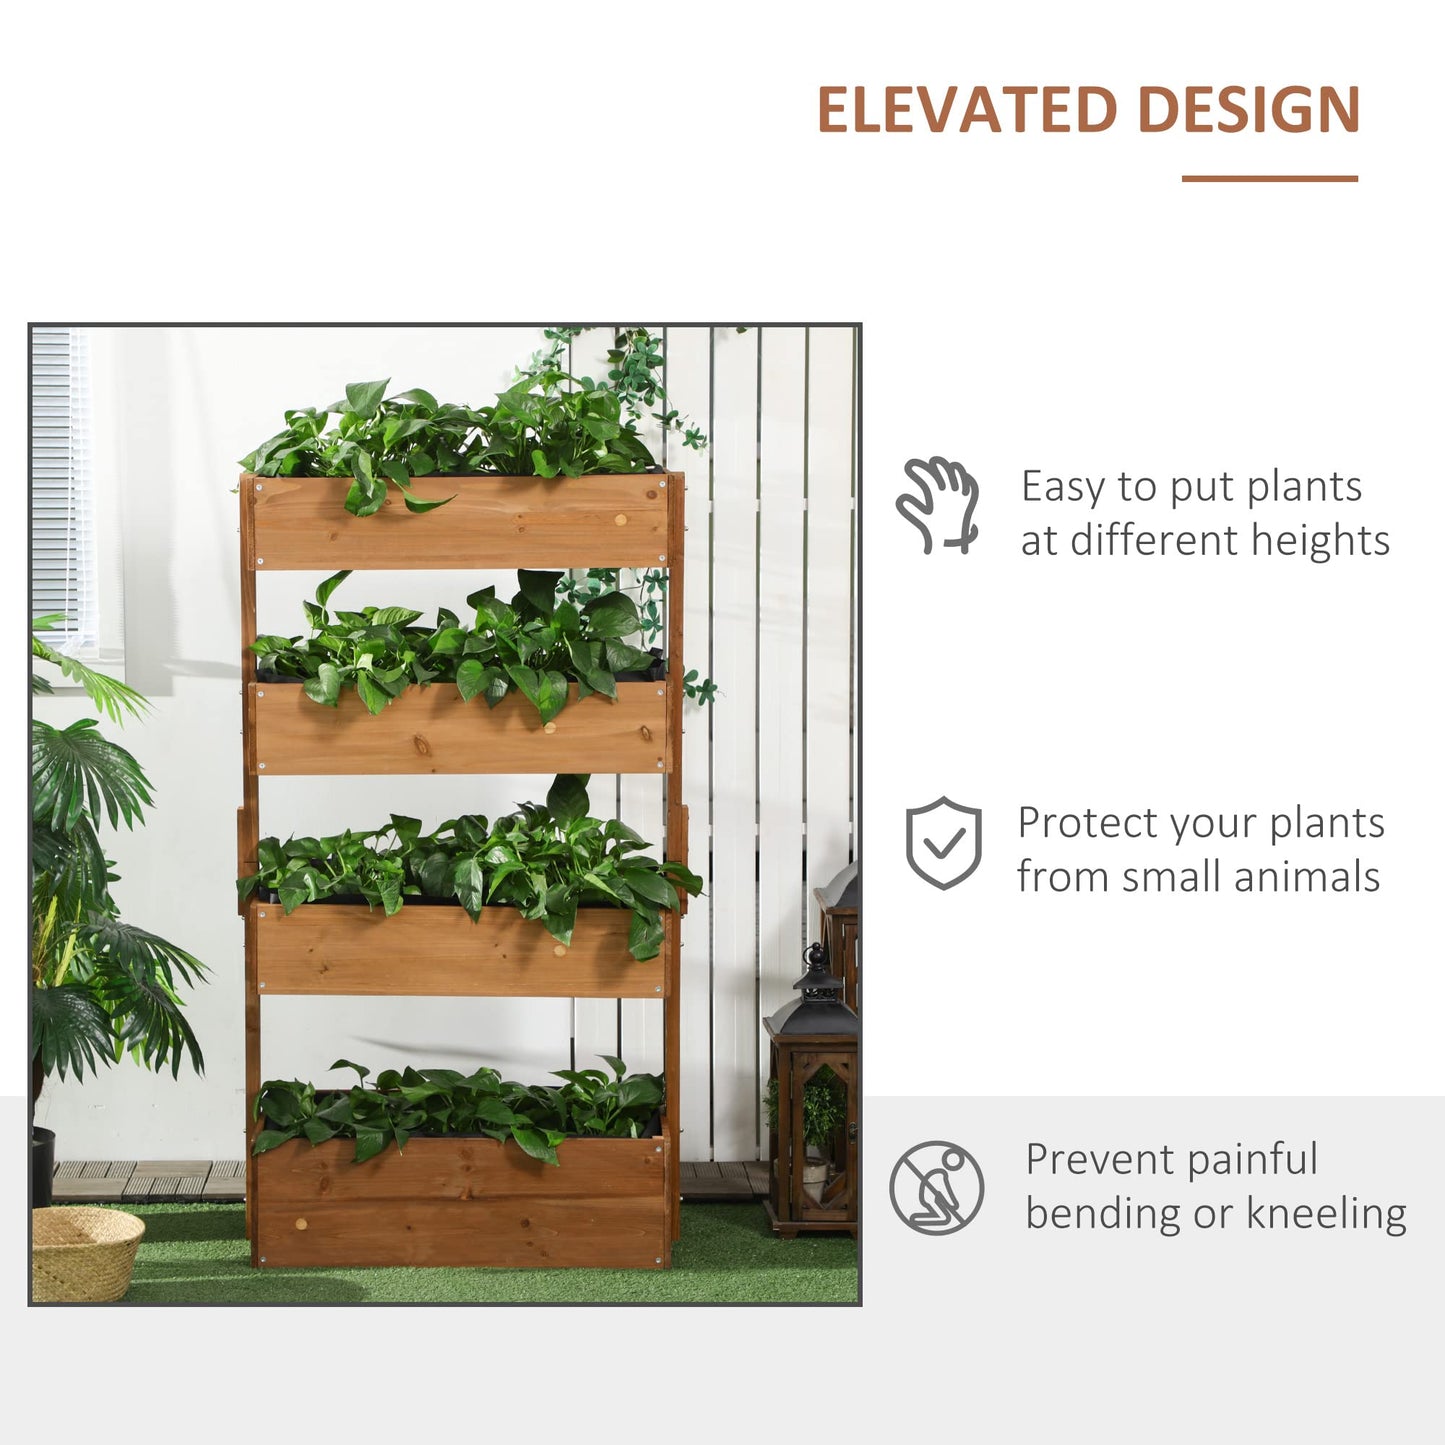 Outsunny Vertical Garden Planter, Wooden 4 Tier Planter Box, Self-Draining with Non-Woven Fabric for Outdoor Flowers, Vegetables and Herbs, Orange